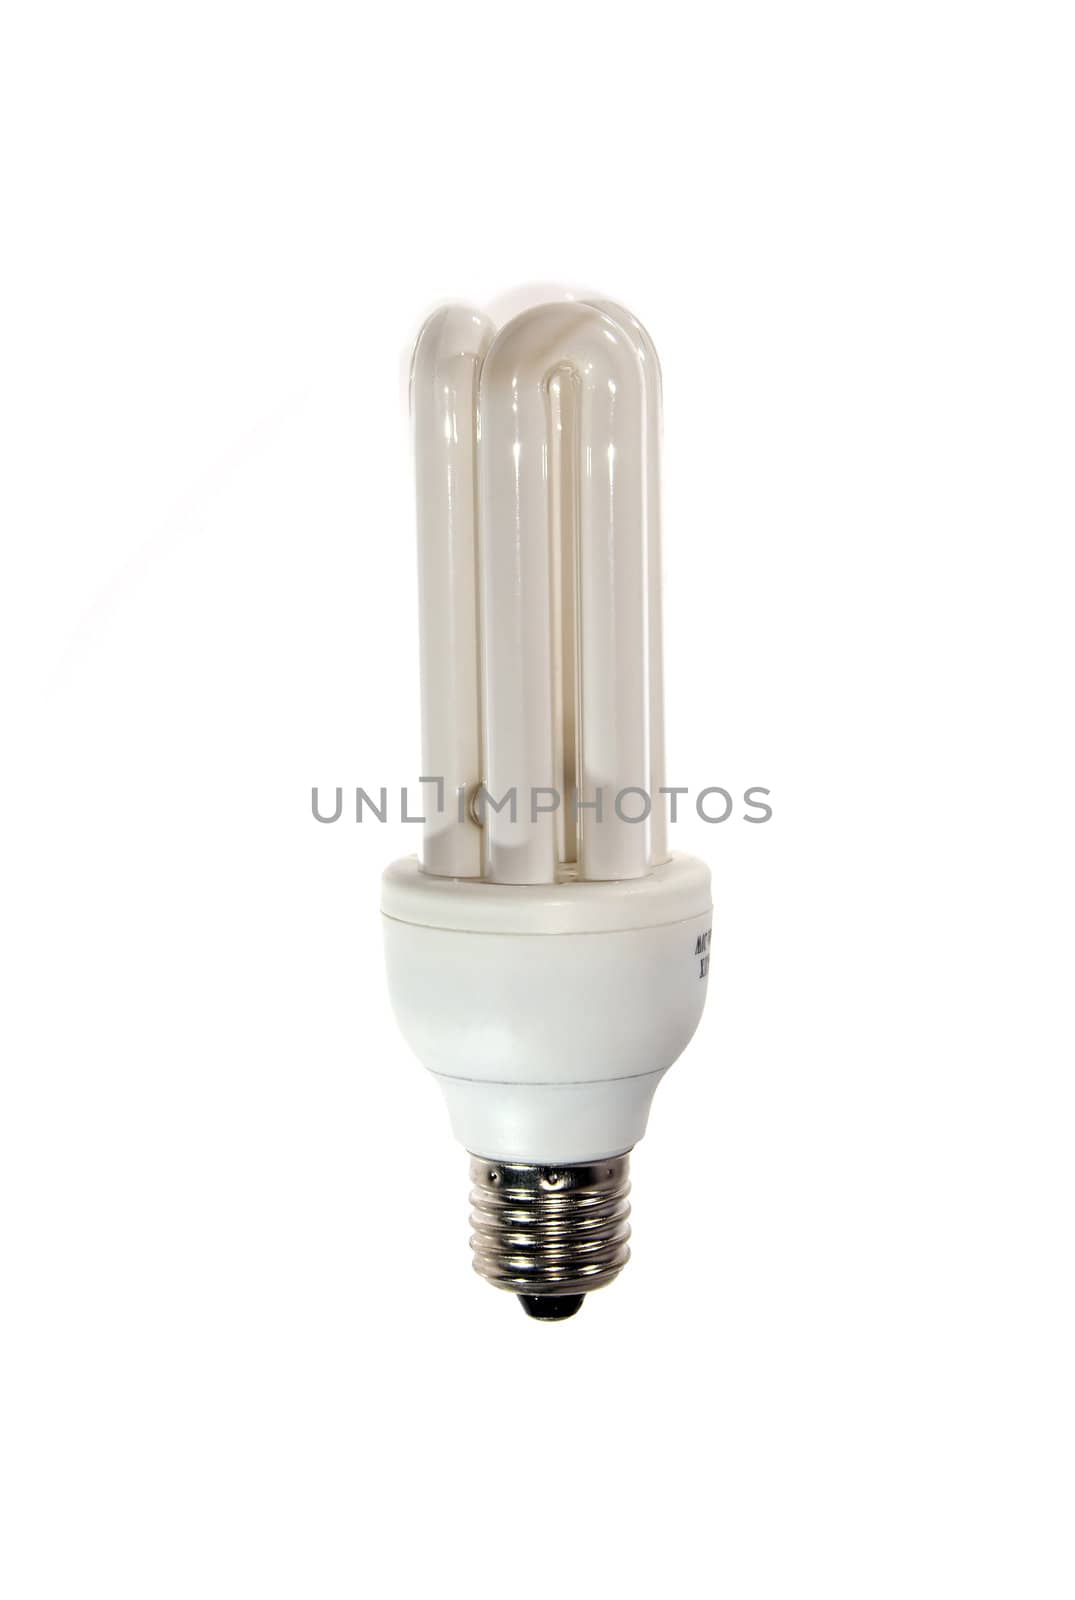 Isolated compact florescent light bulb. 